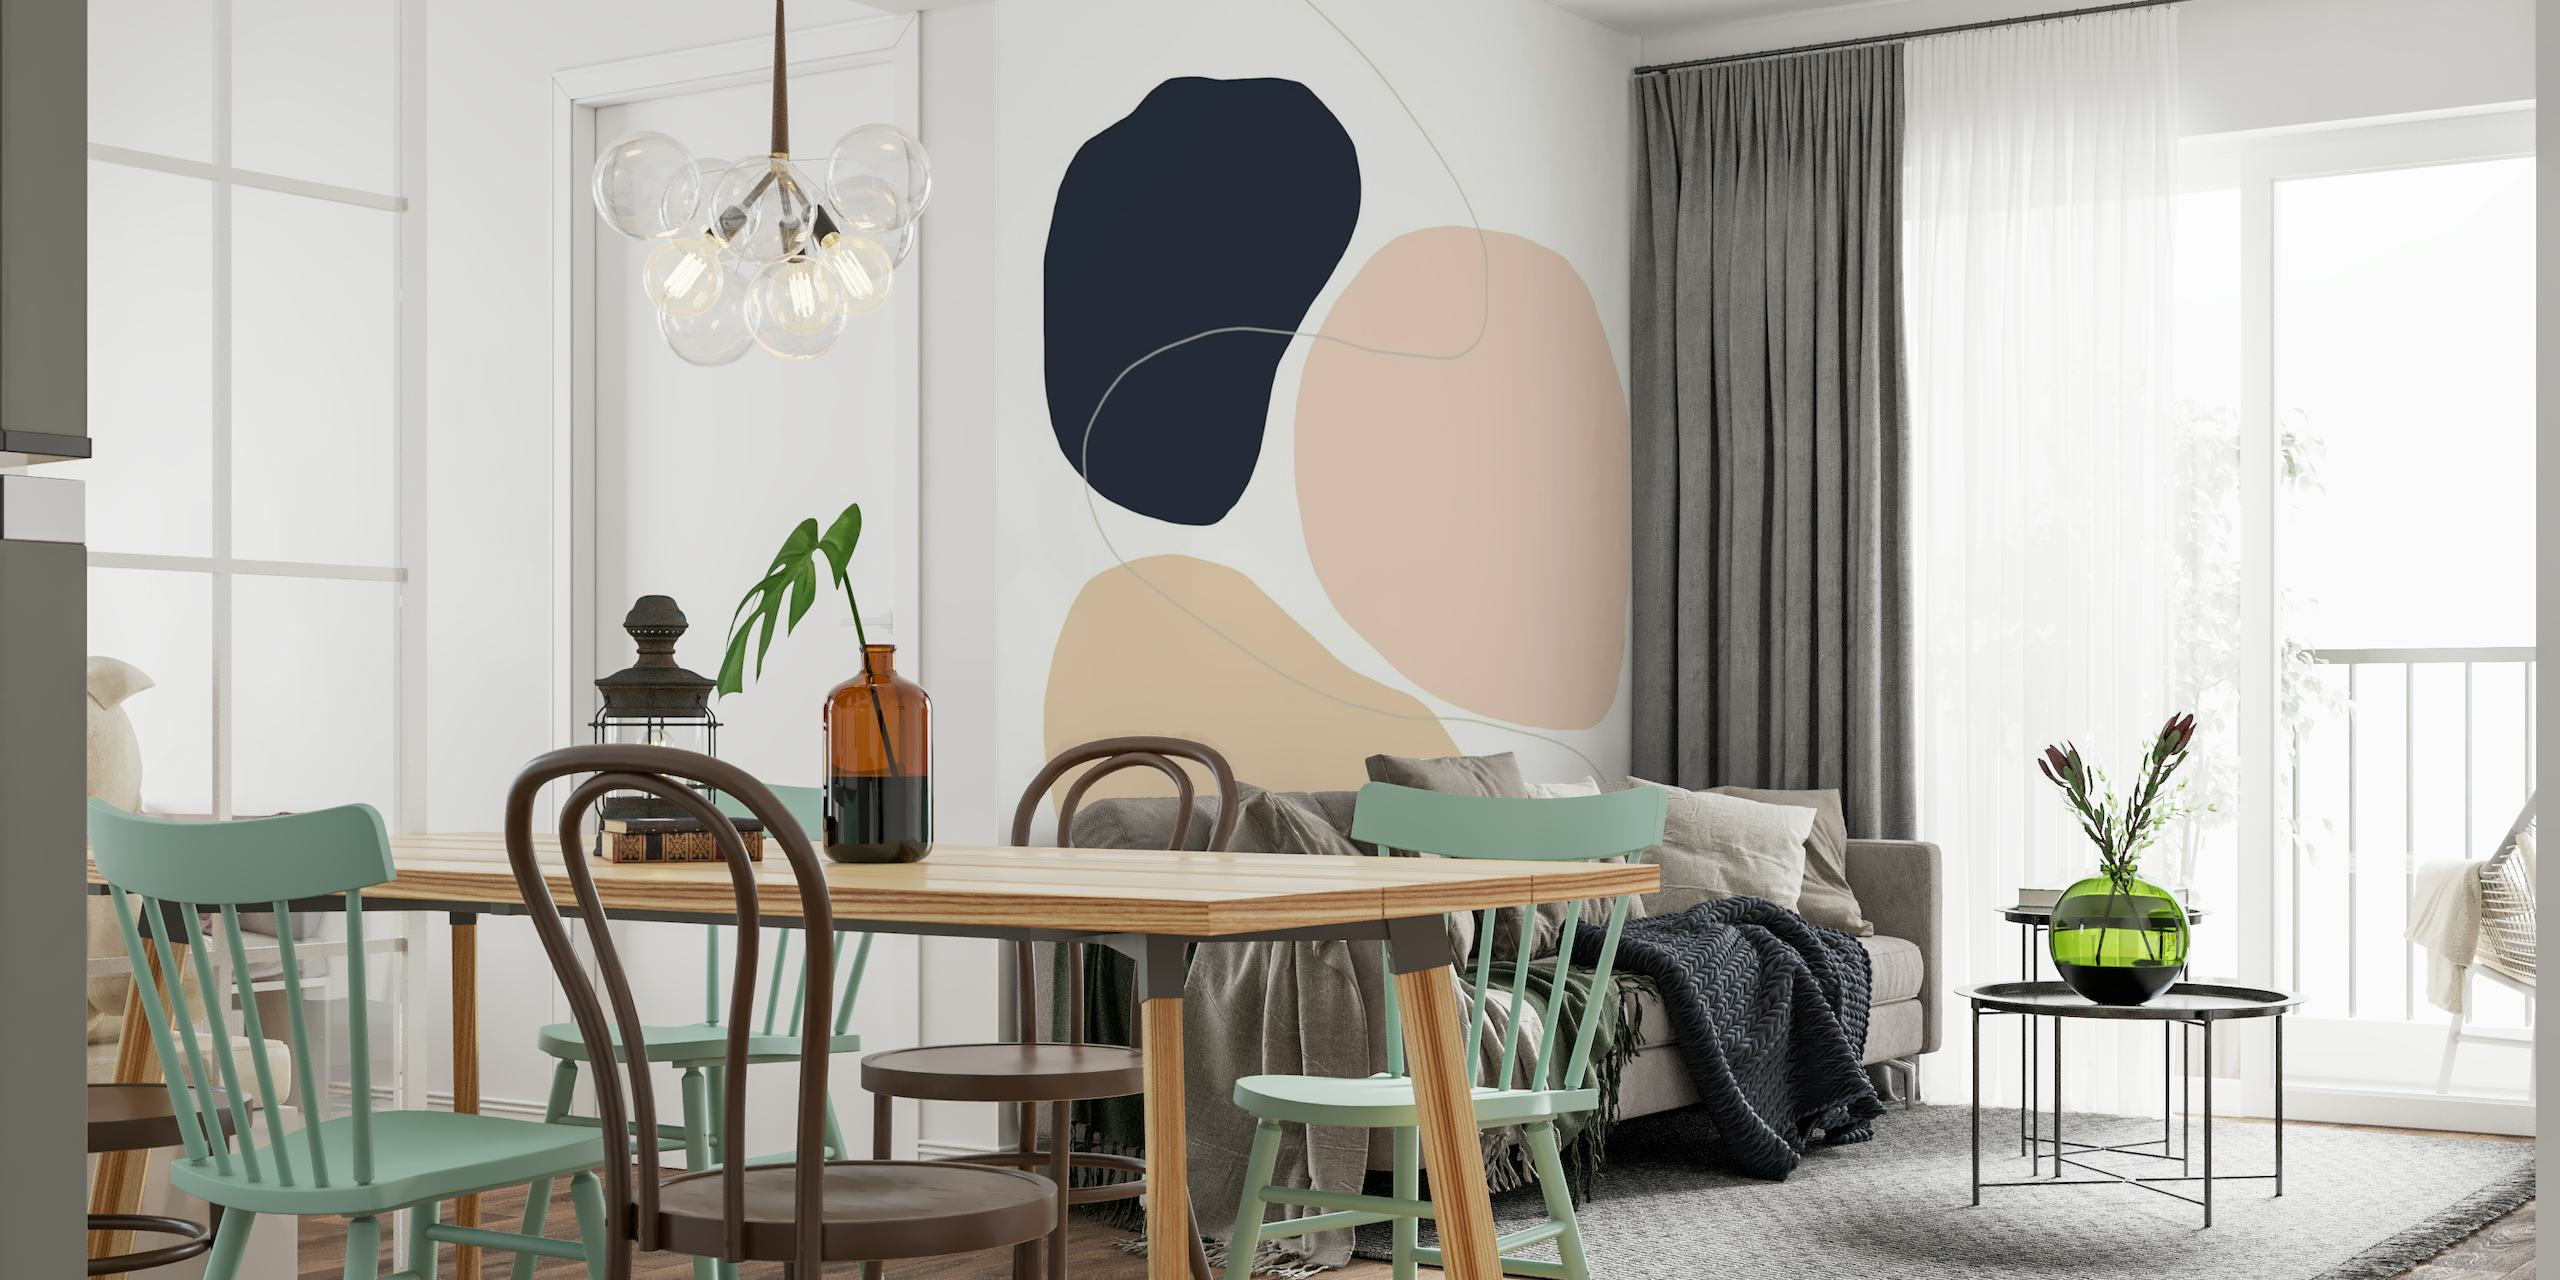 Abstract Stones wall mural with taupe, dusty rose, and navy shapes